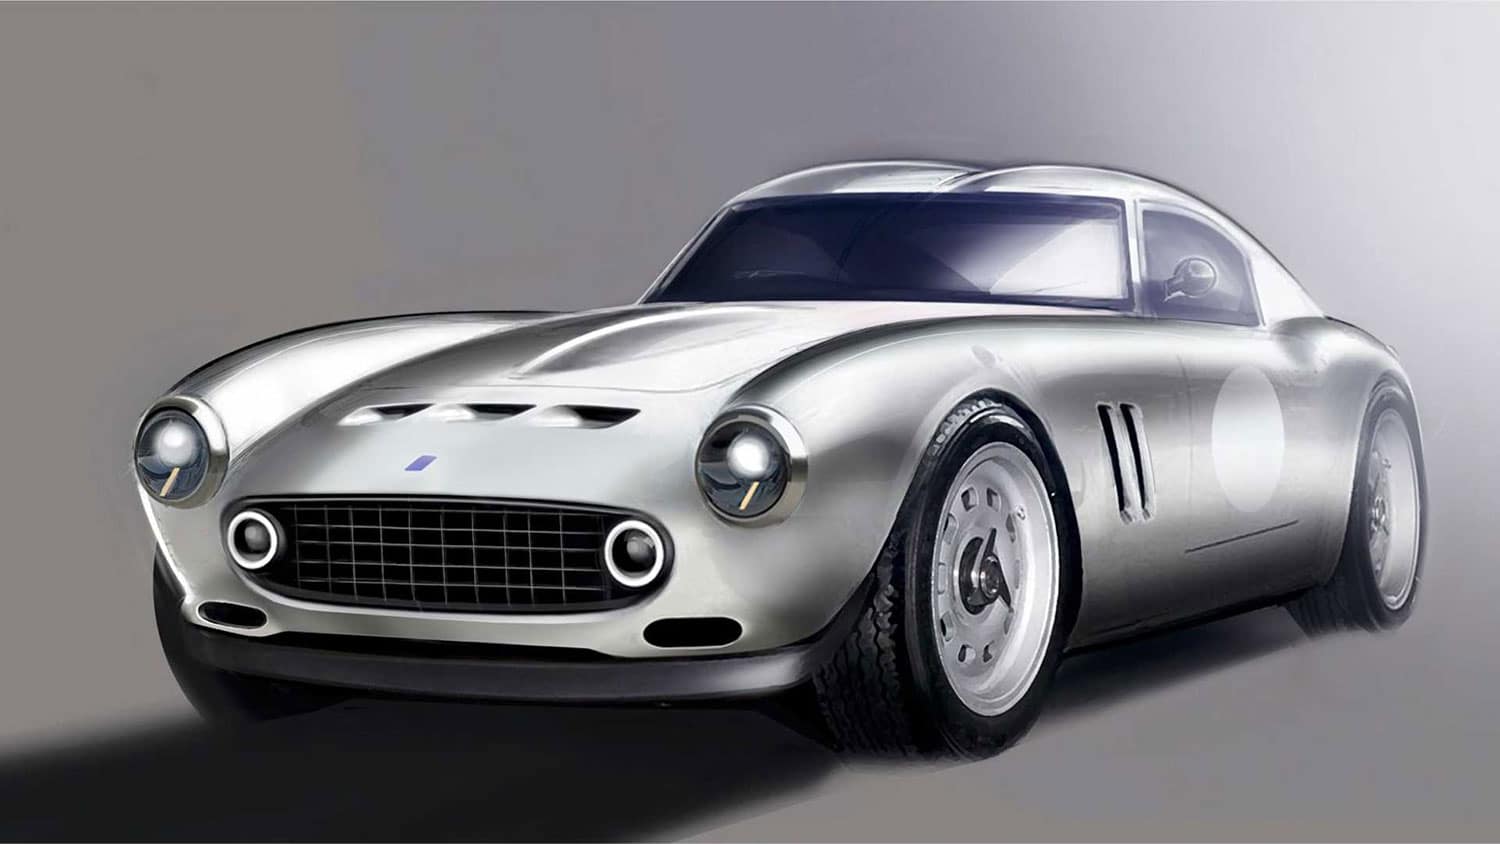 GTO Engineering’s V-12-powered is a tribute to Ferrari in the 60's.